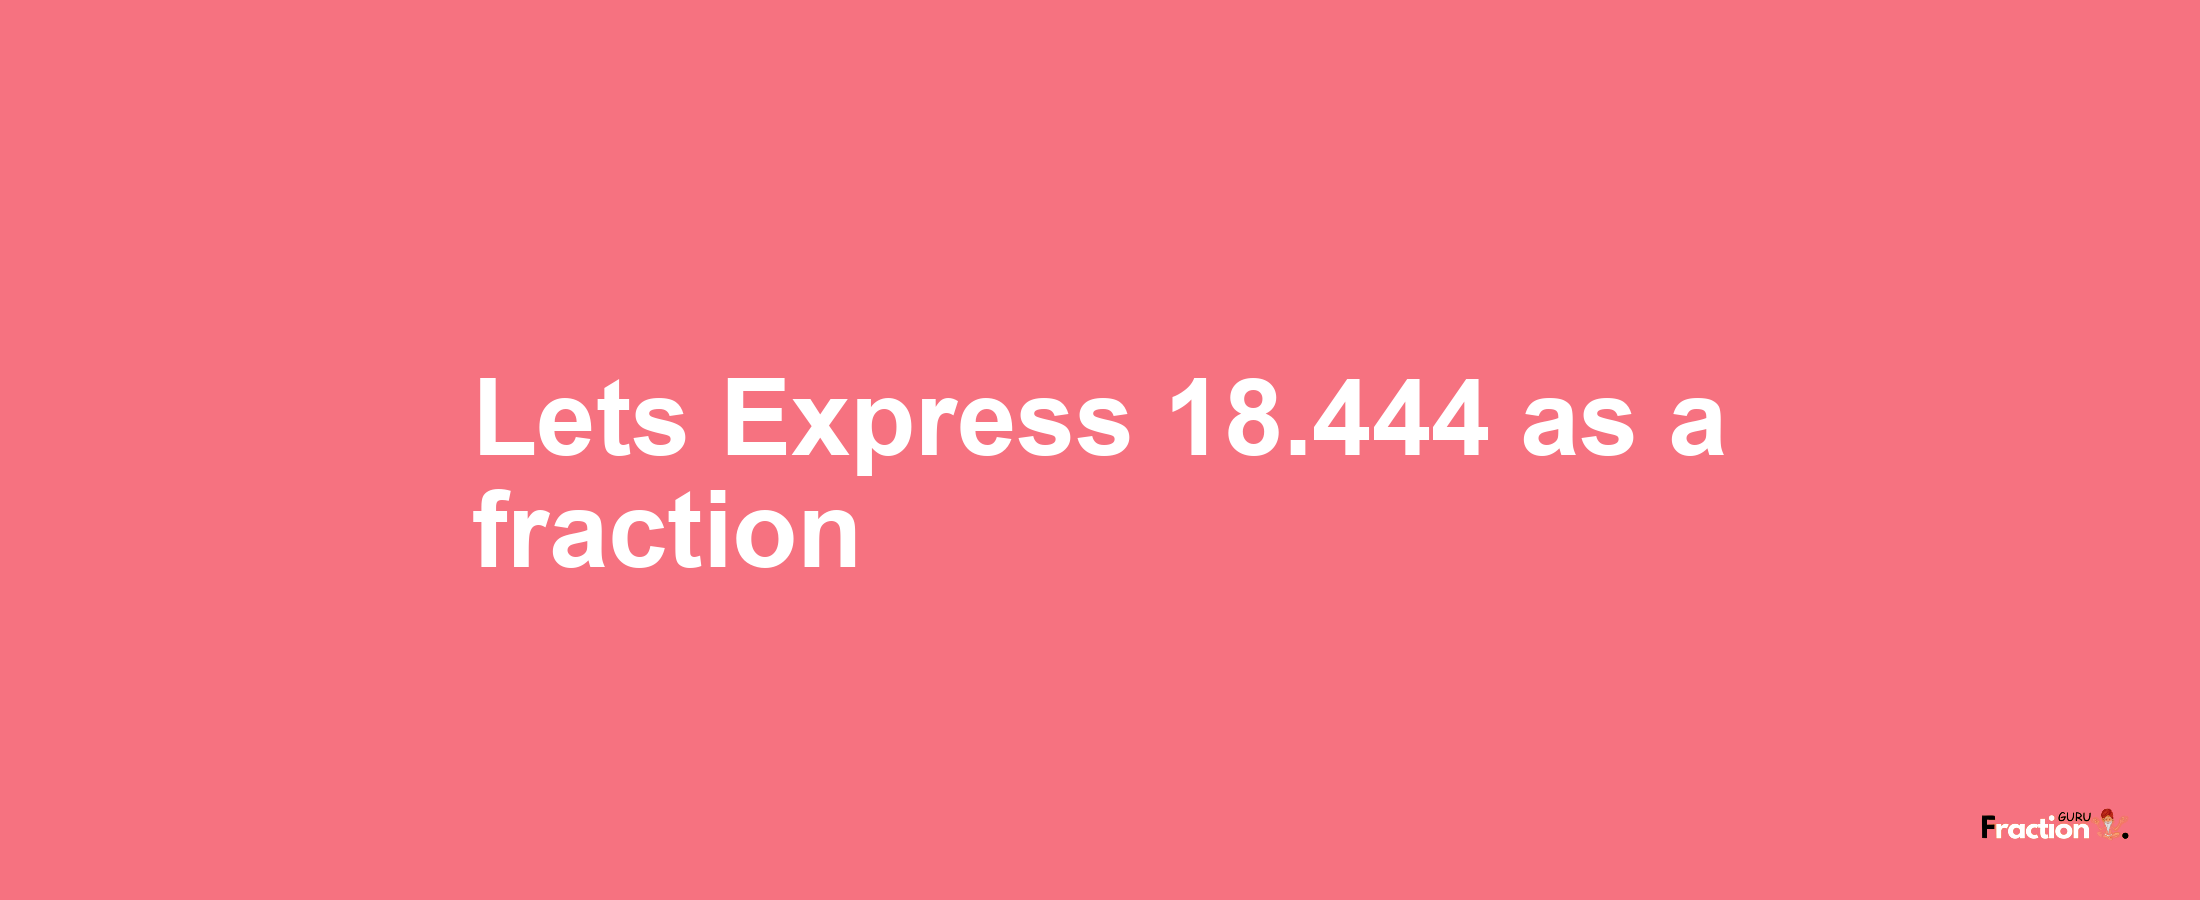 Lets Express 18.444 as afraction